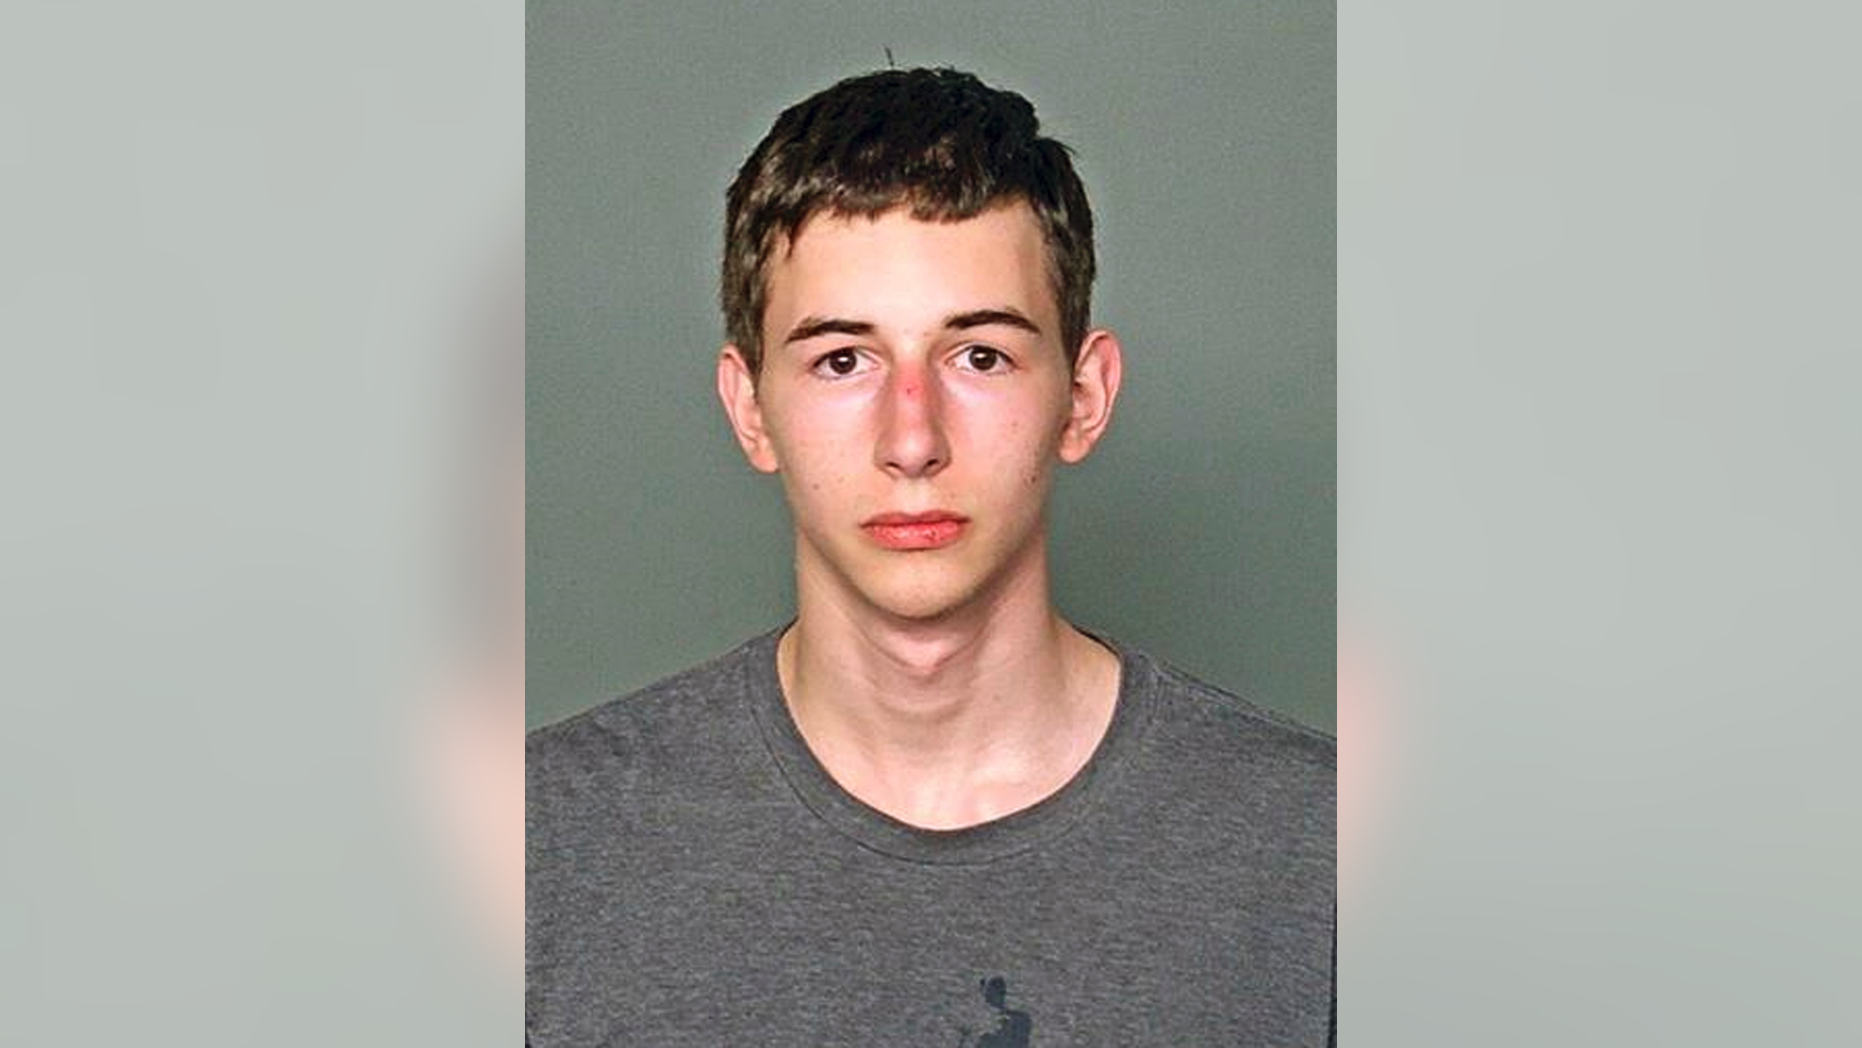 In this undated booking photo provided by the Outagamie County, Wisconsin, sheriff's office, shows 17-year-old Alexander M. Kraus, who police say has admitted he fatally shot an elderly couple he knew in eastern Wisconsin and that he was planning to cause harm at his high school. Grand Chute police told the Associated Press Monday, that police responding to a 911 call found the bodies in a Grand Chute home Sunday morning. Police say Alexander M. Kraus, of Neenah, was arrested at the house. Kraus is jailed on possible first-degree intentional homicide charges. (Outagamie County Sheriff via AP)